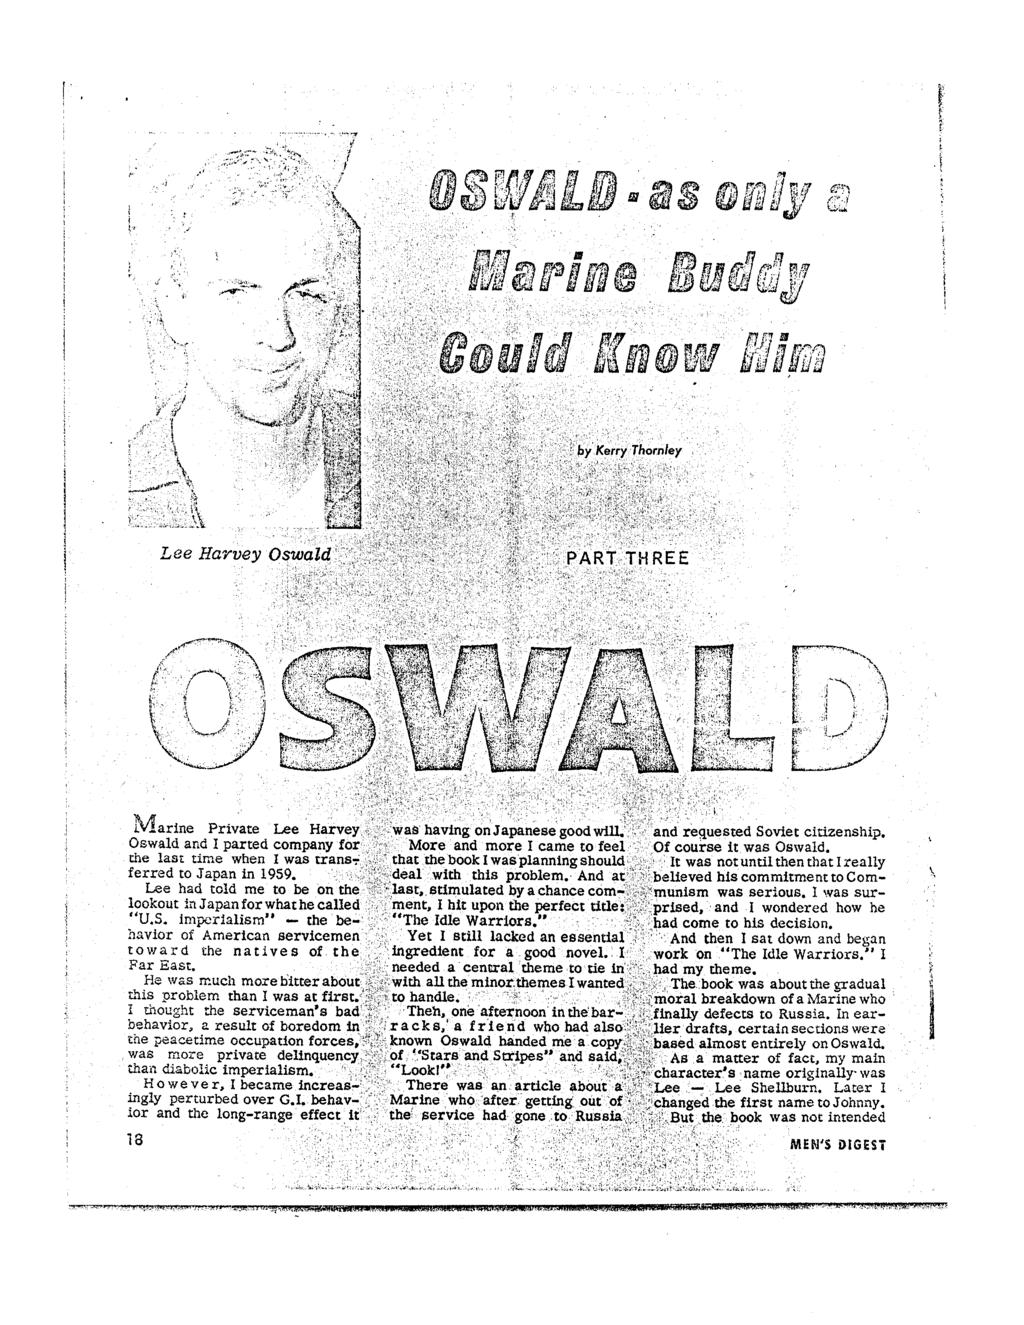 Li2 1 d Lee Harvey Oswald 74, Lvlarine Private Lee Harvey Oswald and I parted company for the last time when I was trans ferred to Japan in 1959.